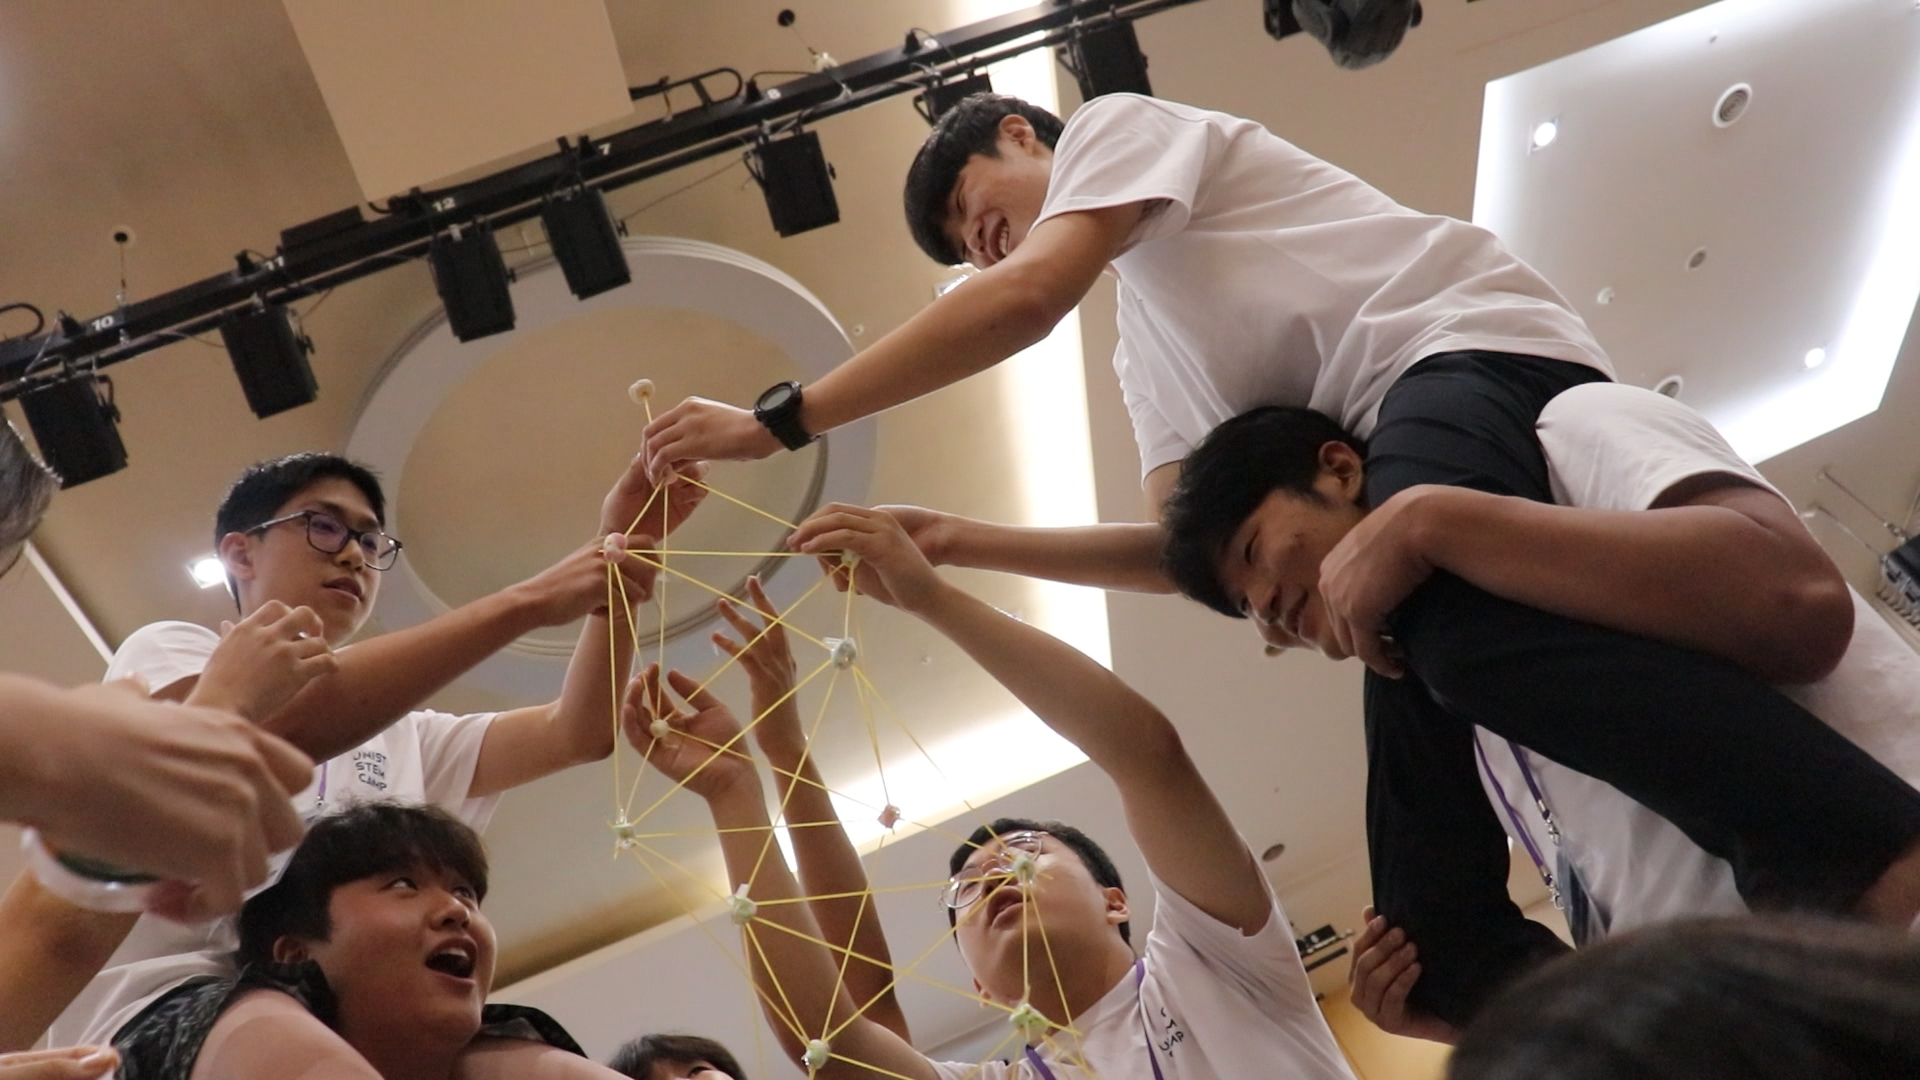 As an additional activity, student participants at the UNIST STEM Camp enthusiastically engage in a tower building game.